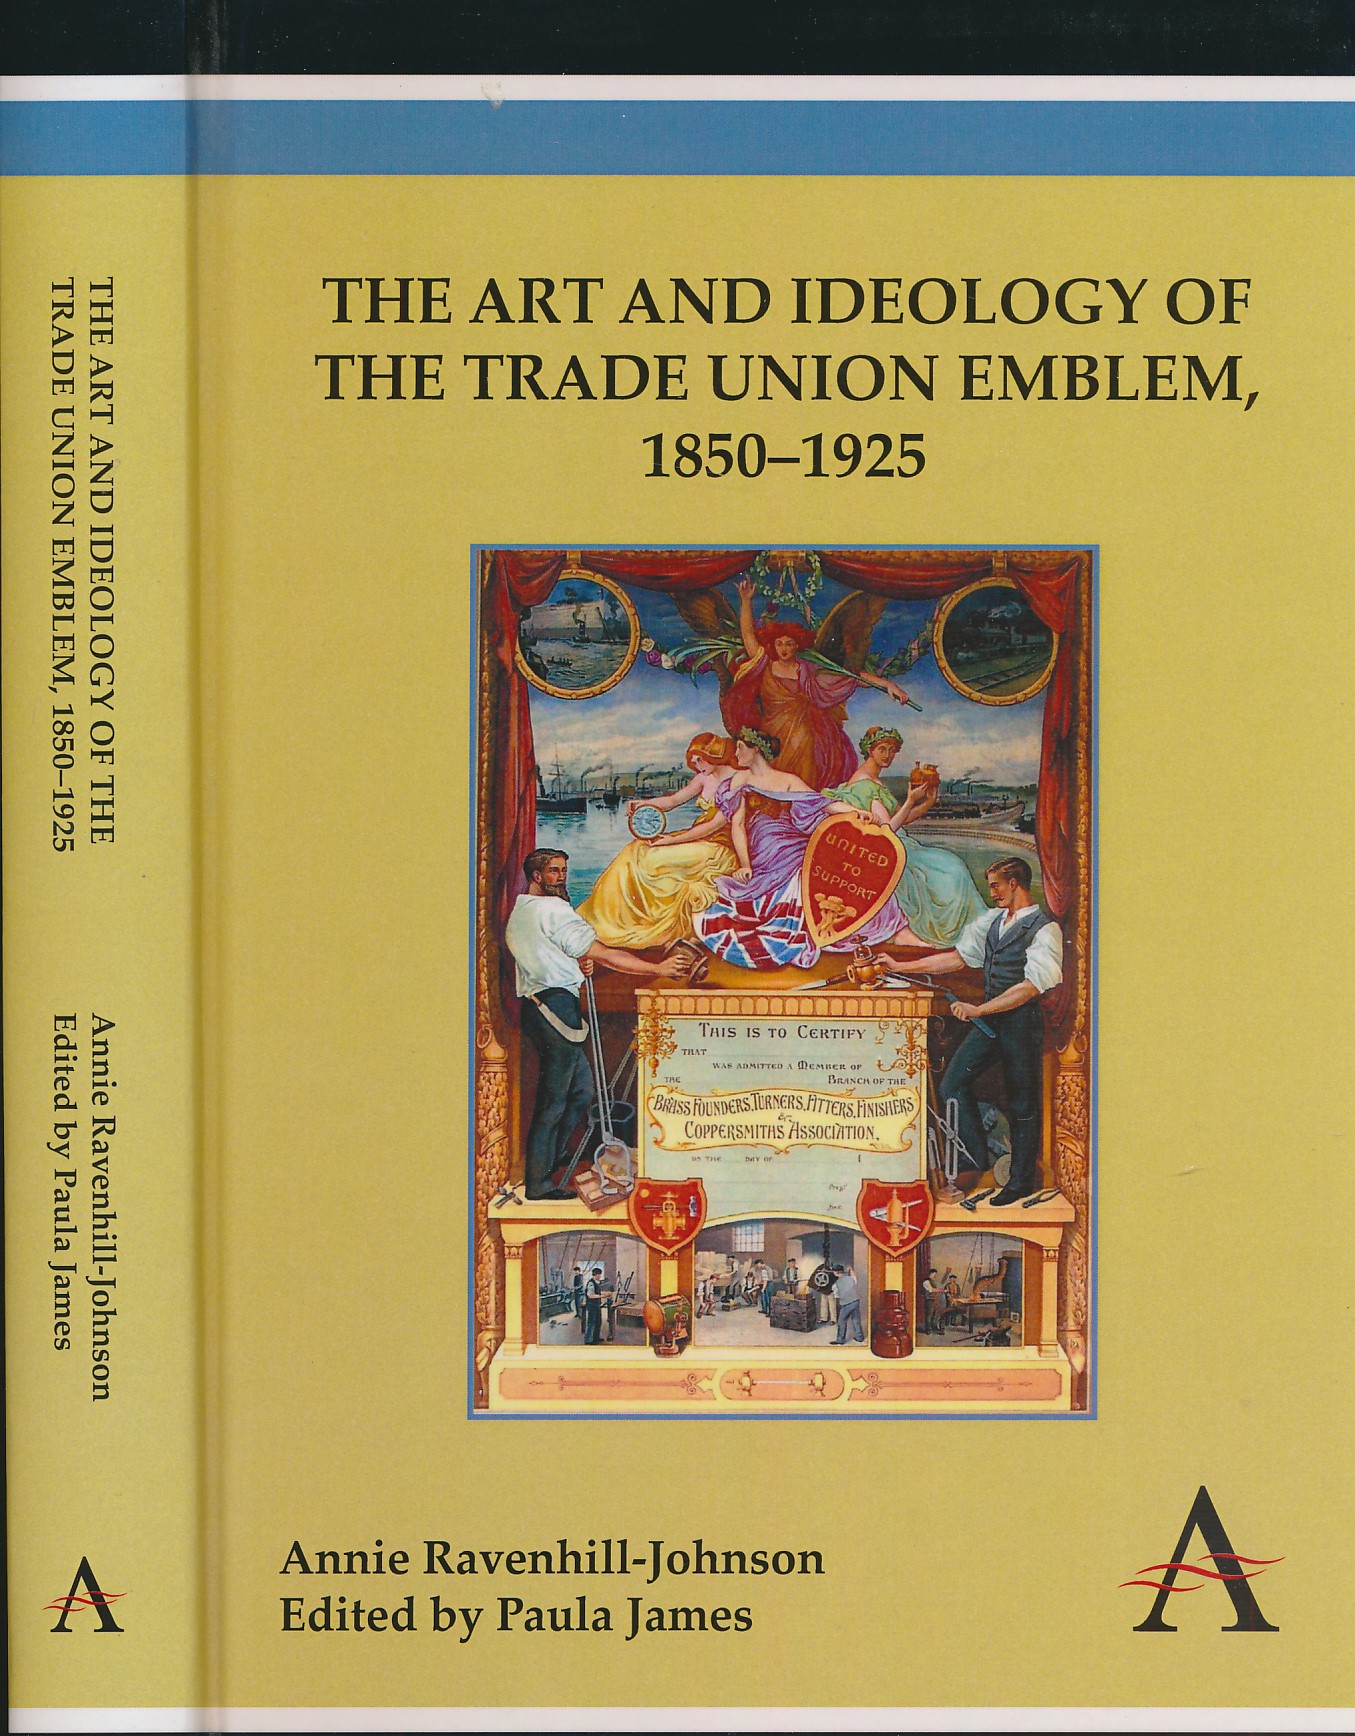 The Art and Ideology of the Trade Union Emblem 1850-1925